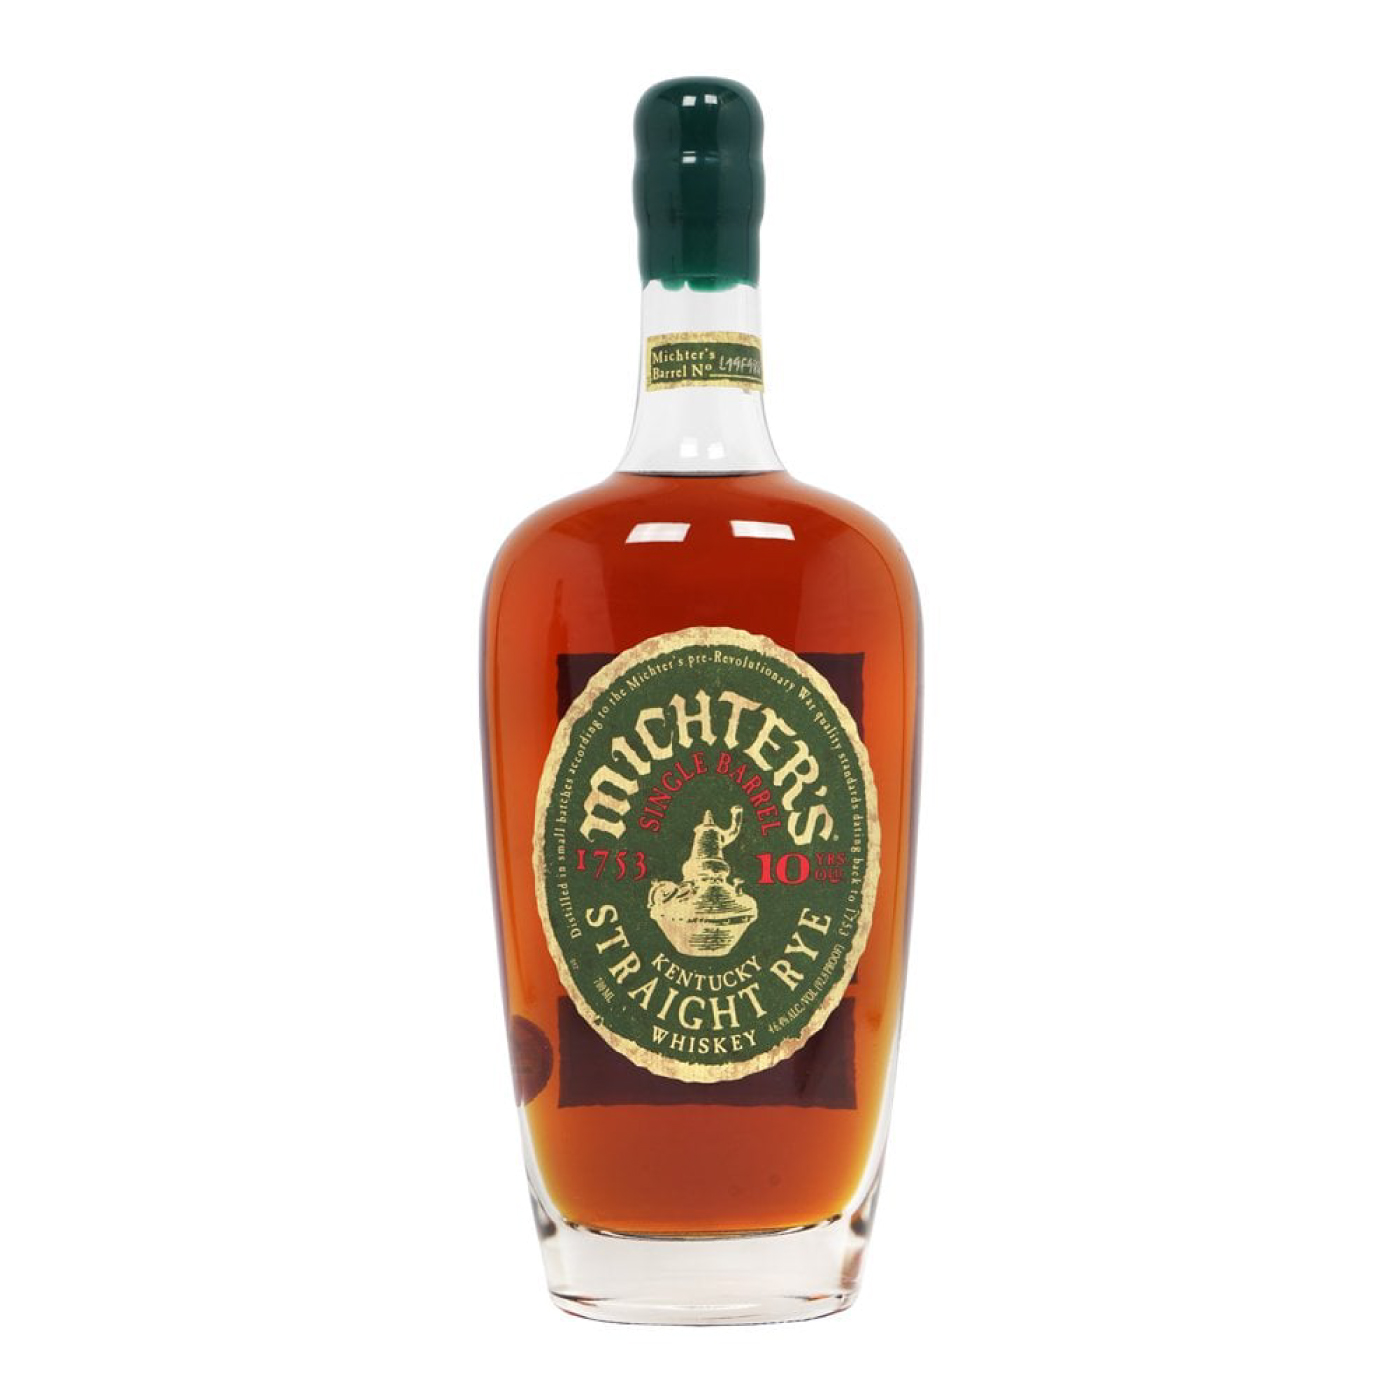 MiICHTER’S 10 YEAR OLD RYE Whisky Club